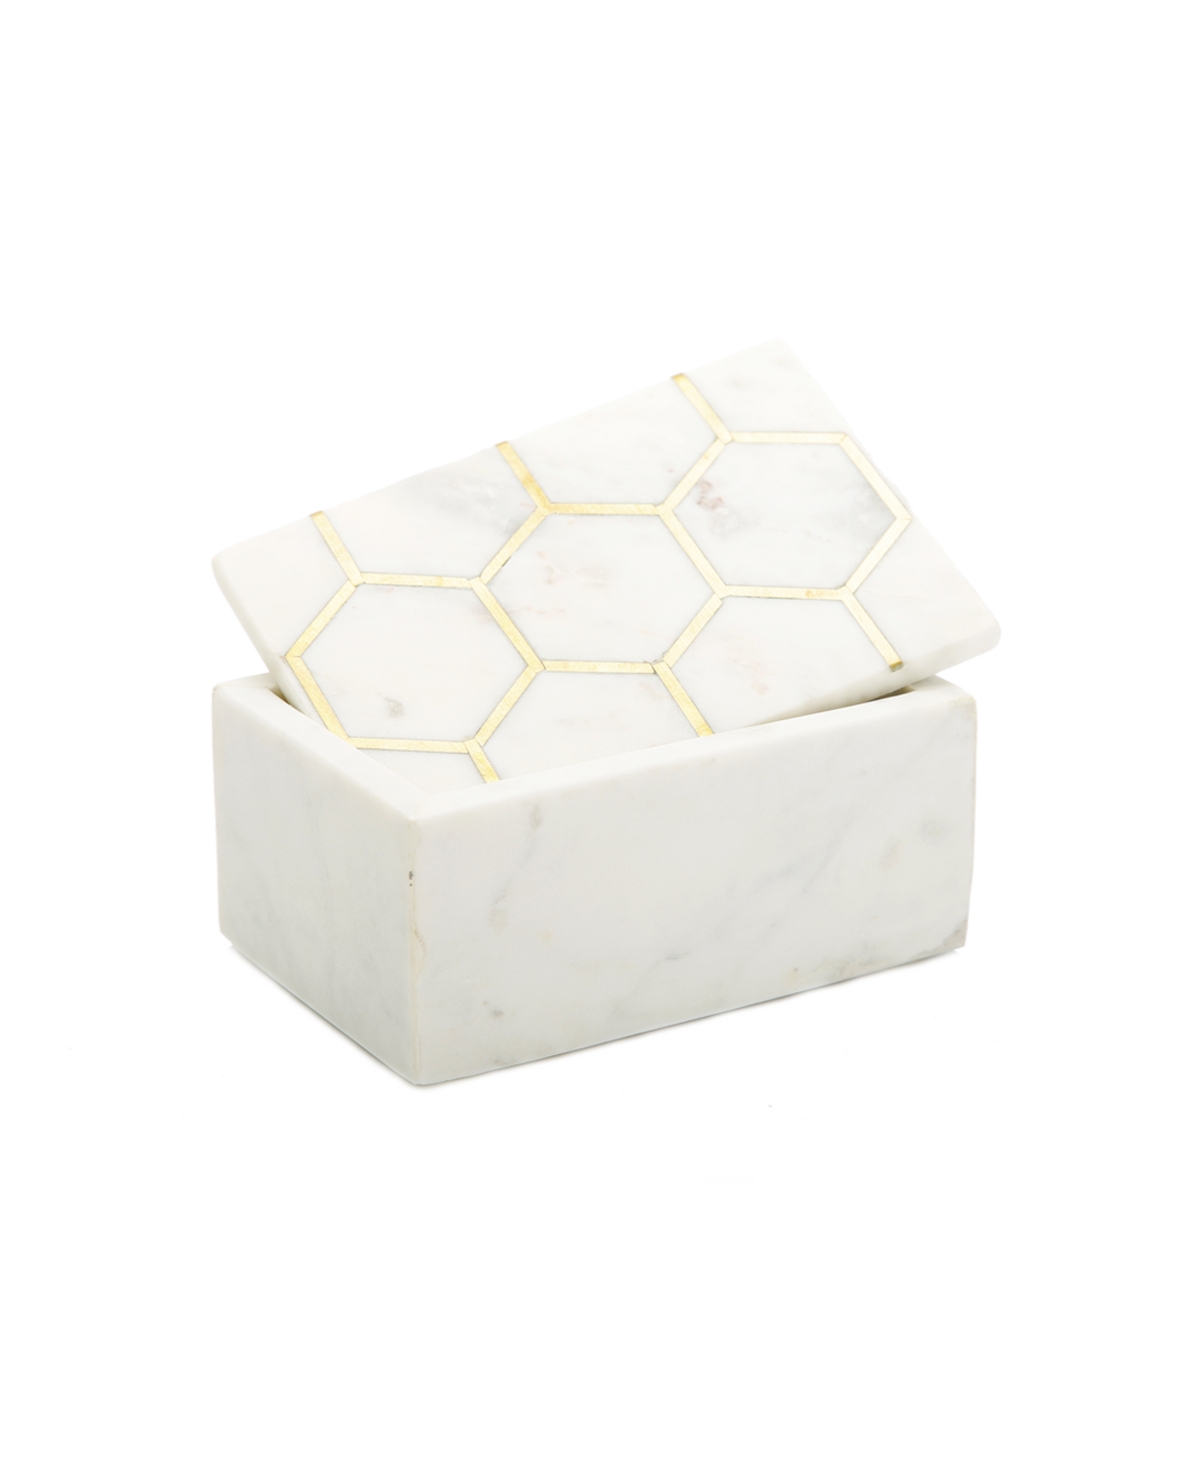 Marble Decorative Box with Hexagon Design on Cover Set, 2 Piece - White and Gold-Tone